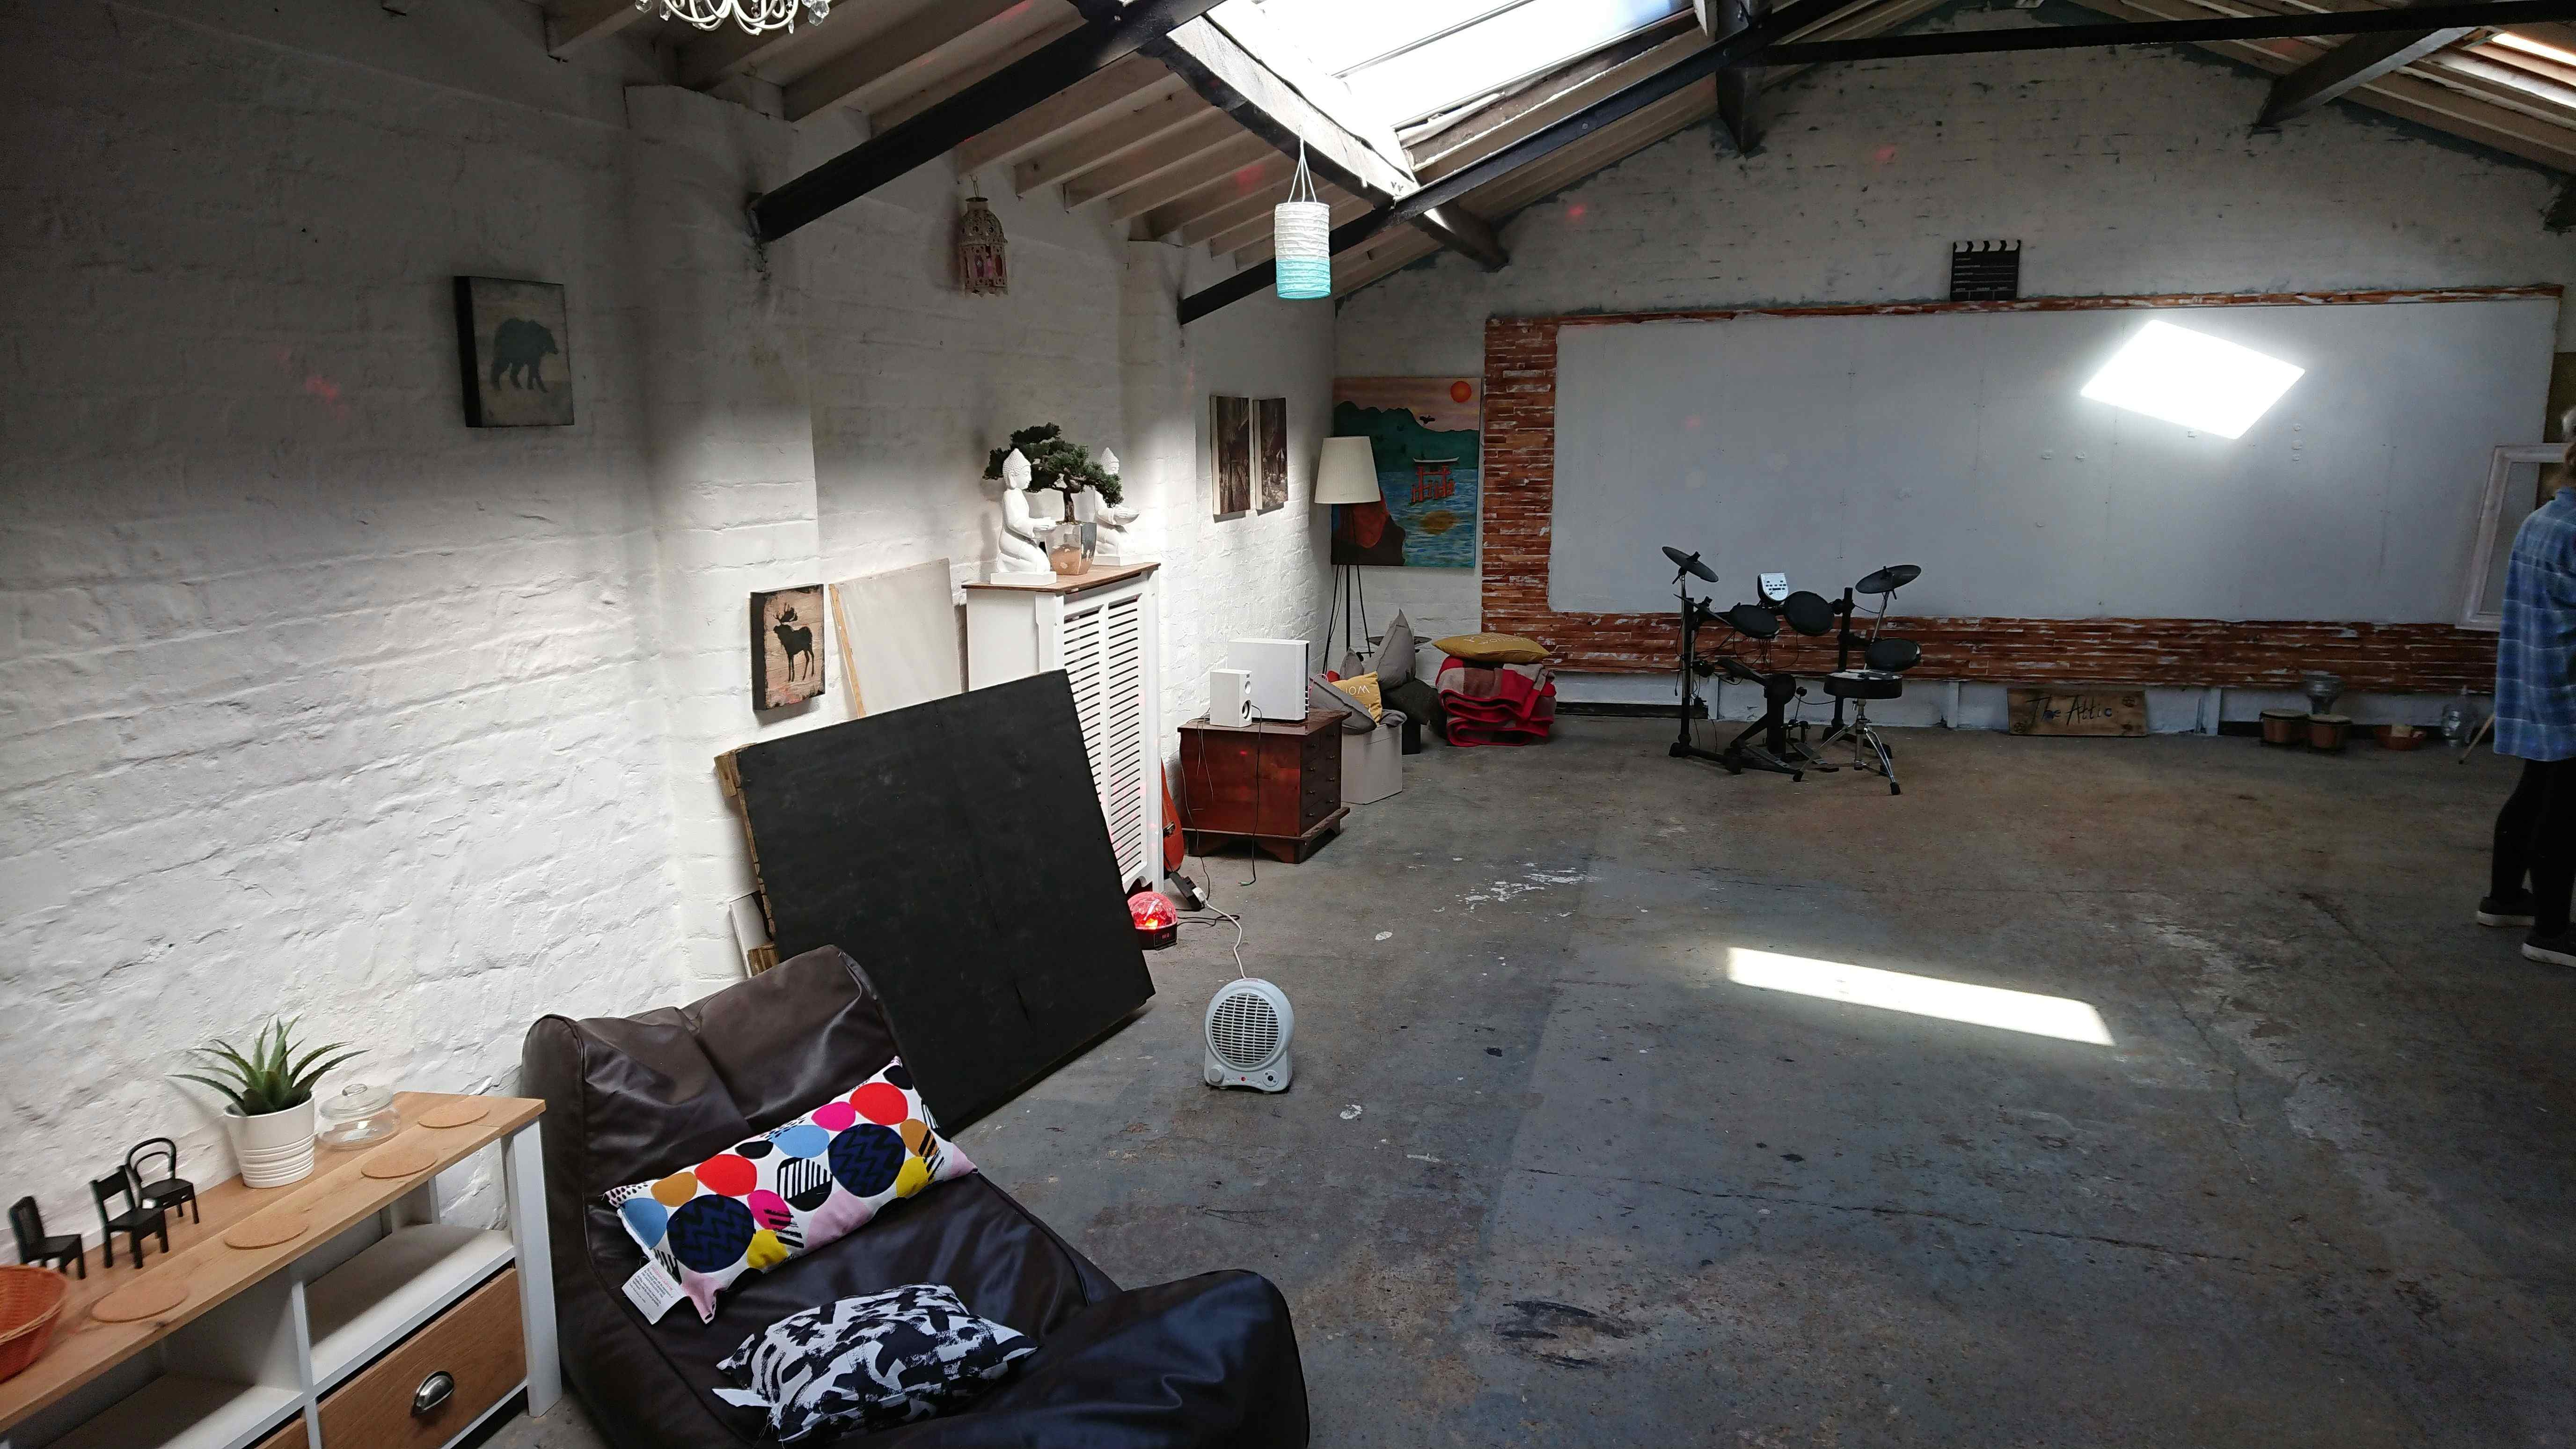 Loft Studios In Kensal Green Nw10 A Fantastic Looking Space That Acts As A Blank Canvas For Your Wed Photography Studio Spaces Loft Studio Dance Studio Design